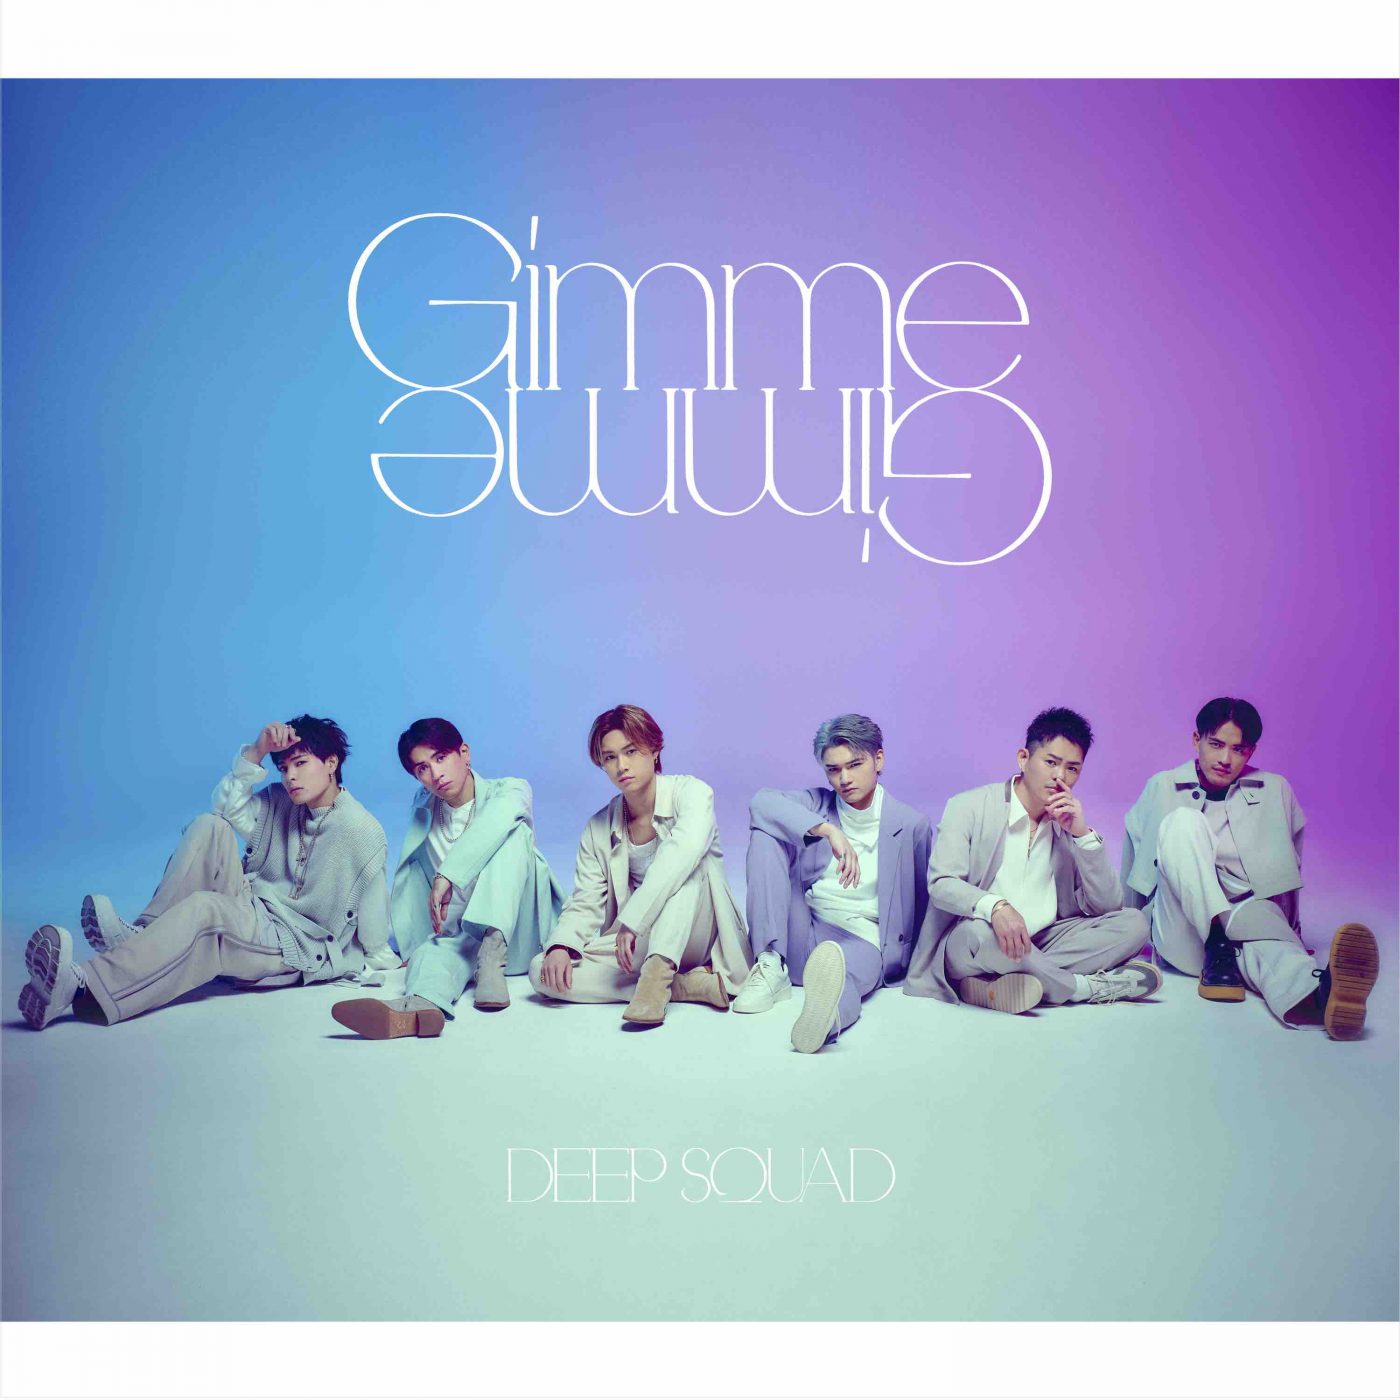 DEEP SQUADが『チェリまほ THE MOVIE』を盛り立てる新曲「Gimme Gimme」で広げる新たな可能性 - 画像一覧（2/17）